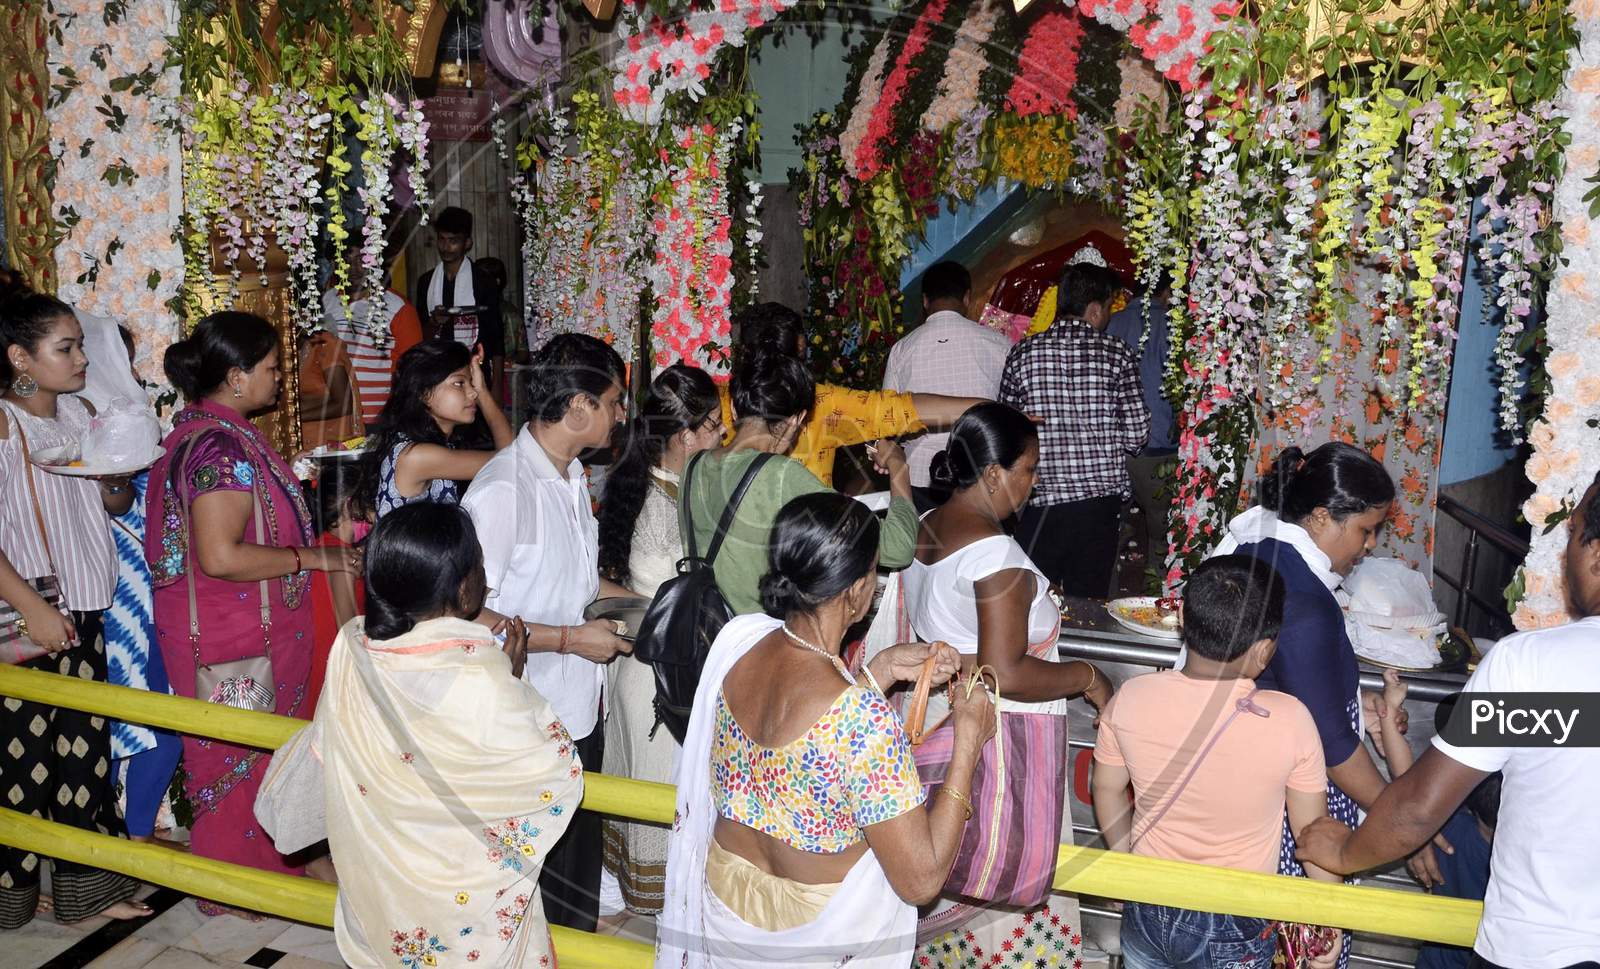 Devotees throng to offer prayers to Lord Ganesha